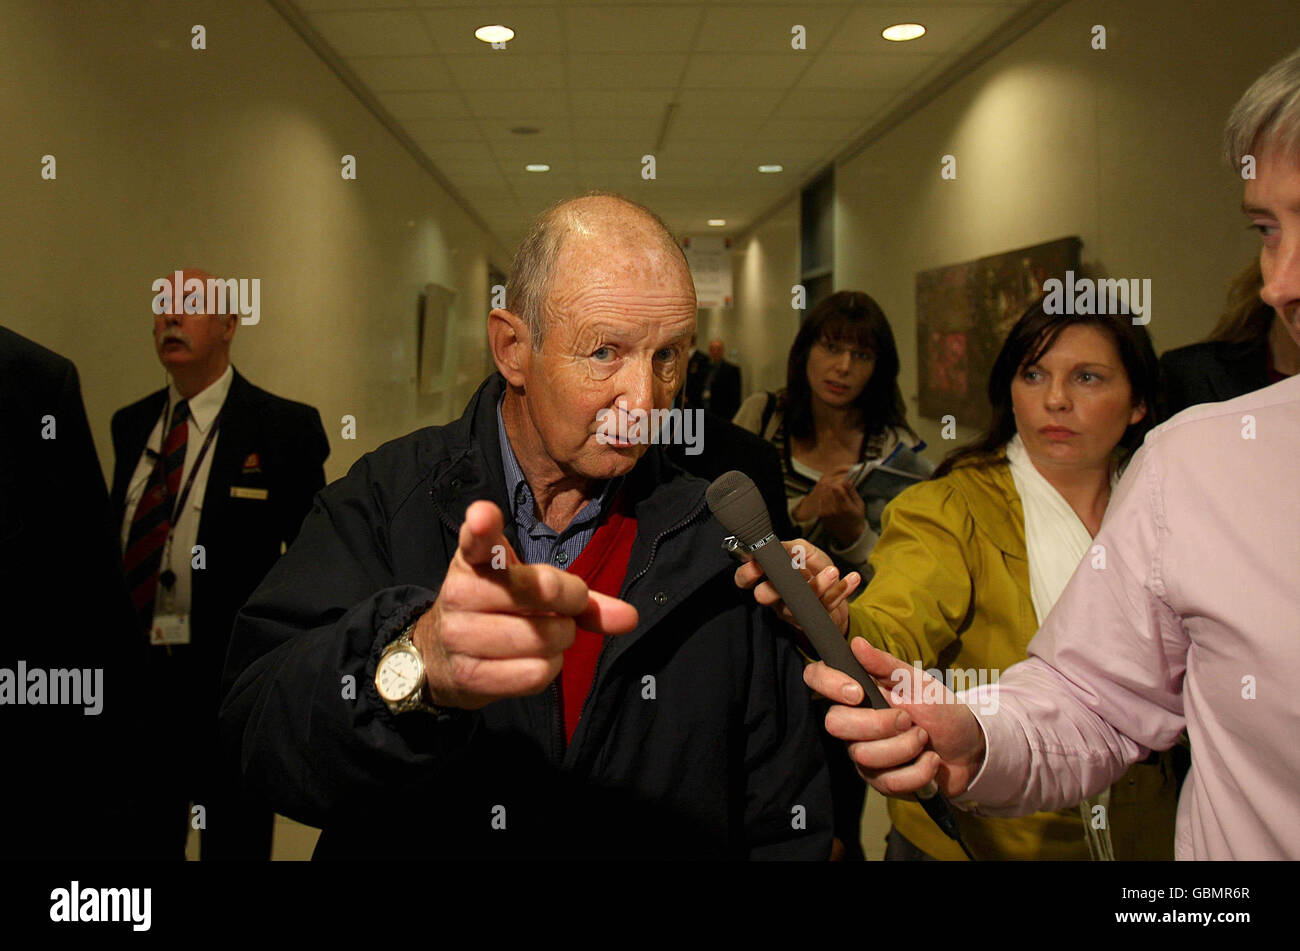 Protester Gary Keogh from Blackrock is interviewed by media as he is escorted from Ailled Irish Banks Headquarters in Ballsbridge Dublin. Shareholders packed Allied's banking centre for an EGM, where they will later vote to ratify the Government's 3.5 billion euro (3.1 billion) recapitalisation plan. Stock Photo